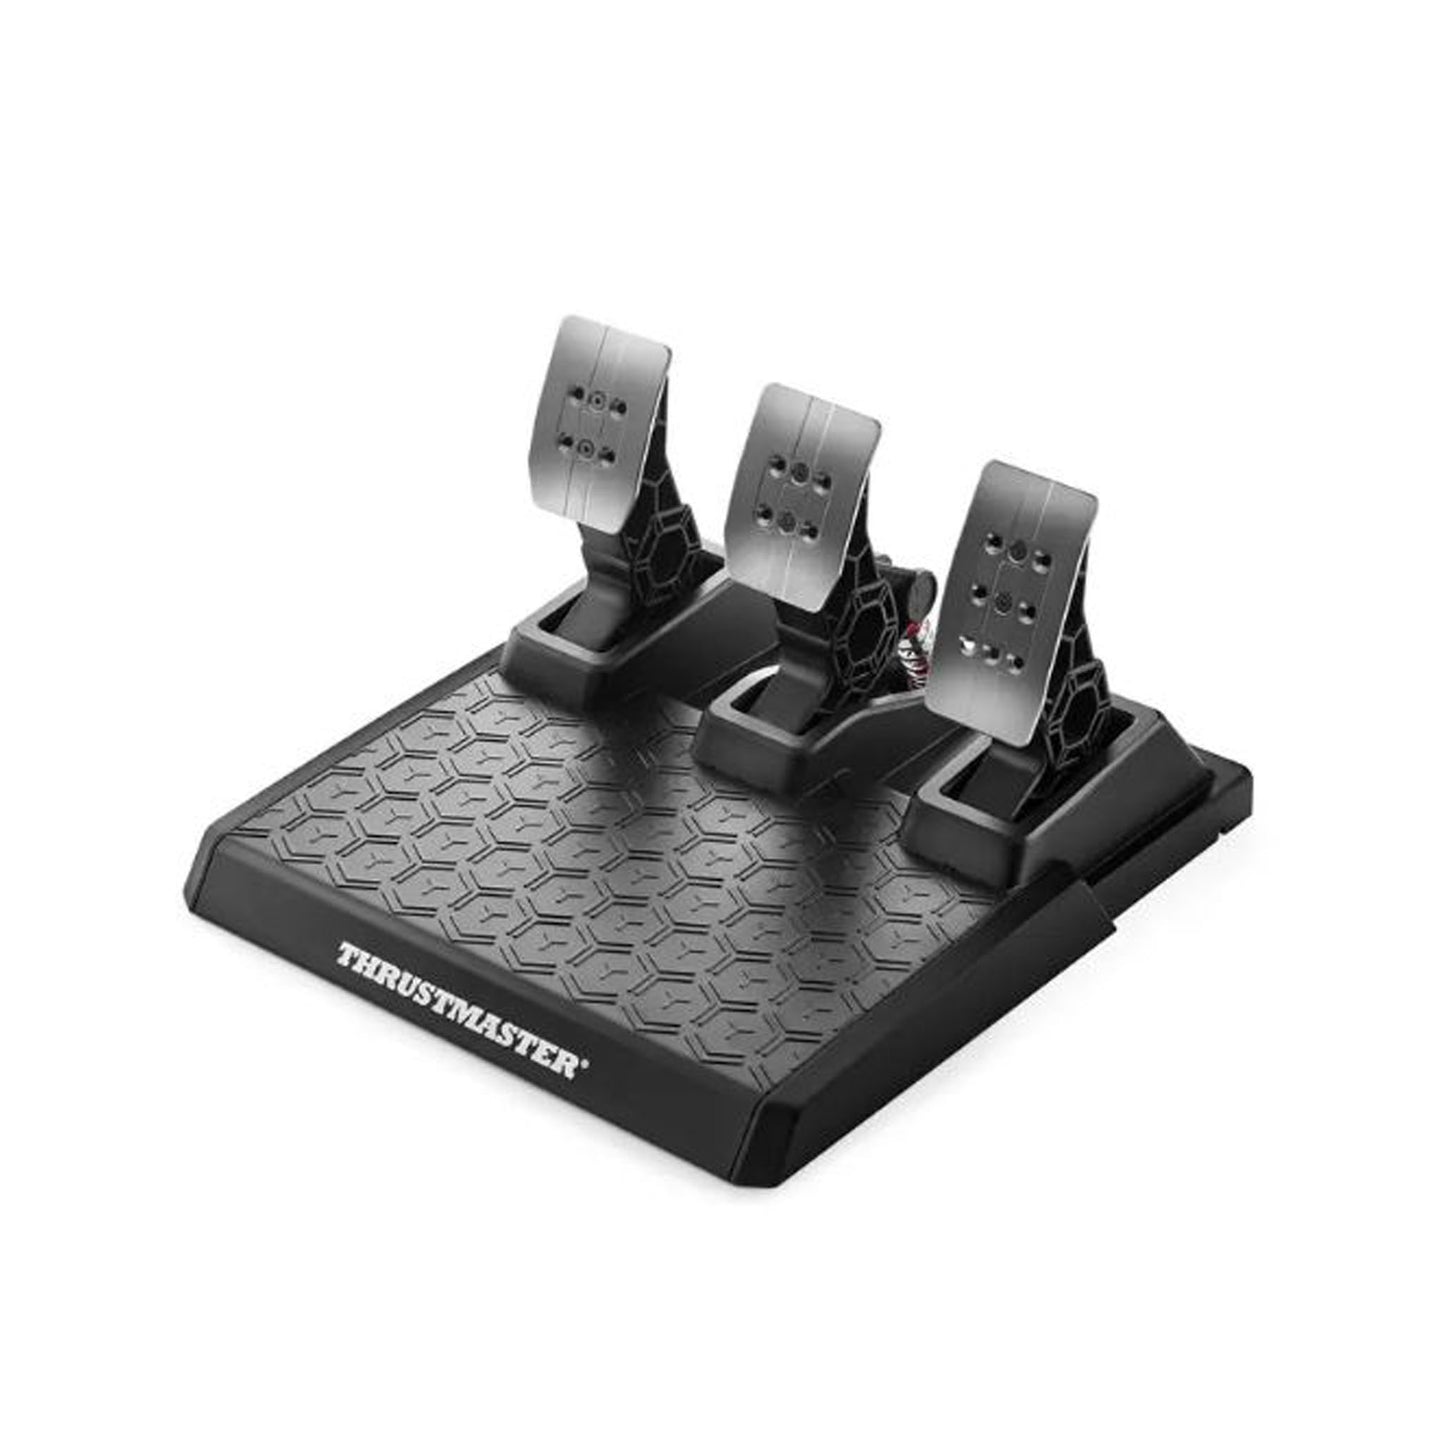 T-248 Thrustmaster Gaming Steering Wheel for PC, Xbox Series X|S & Xbox One